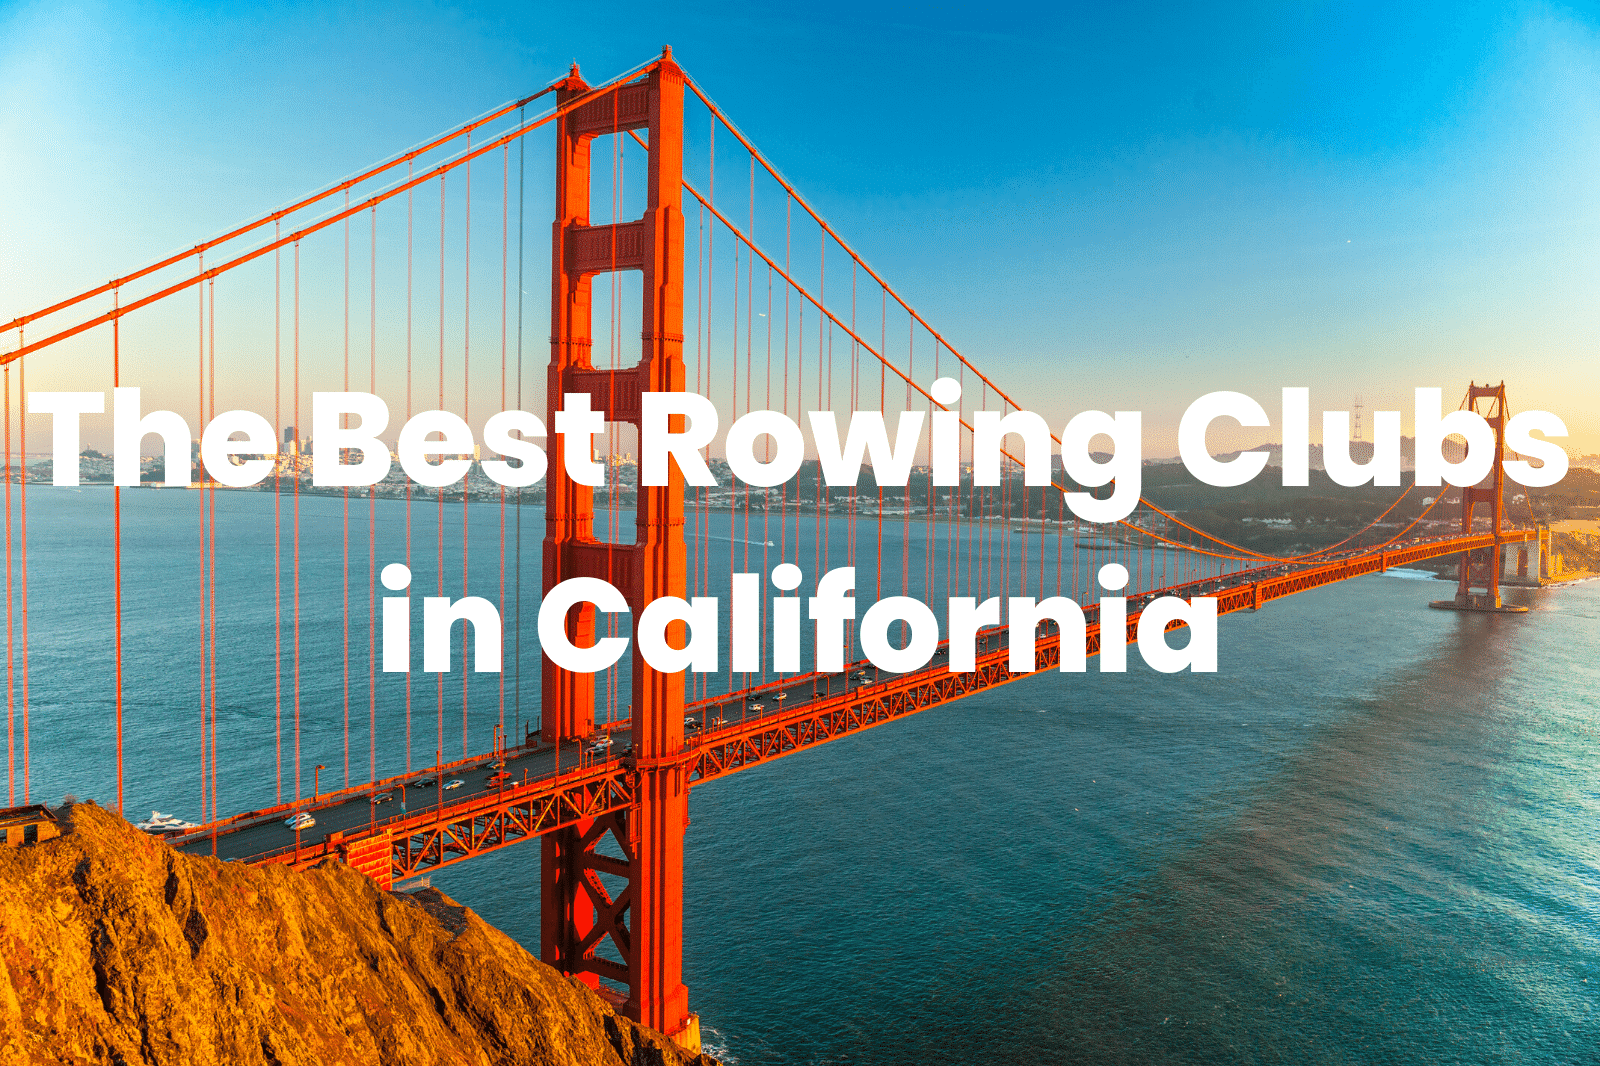 Rowing Clubs in California